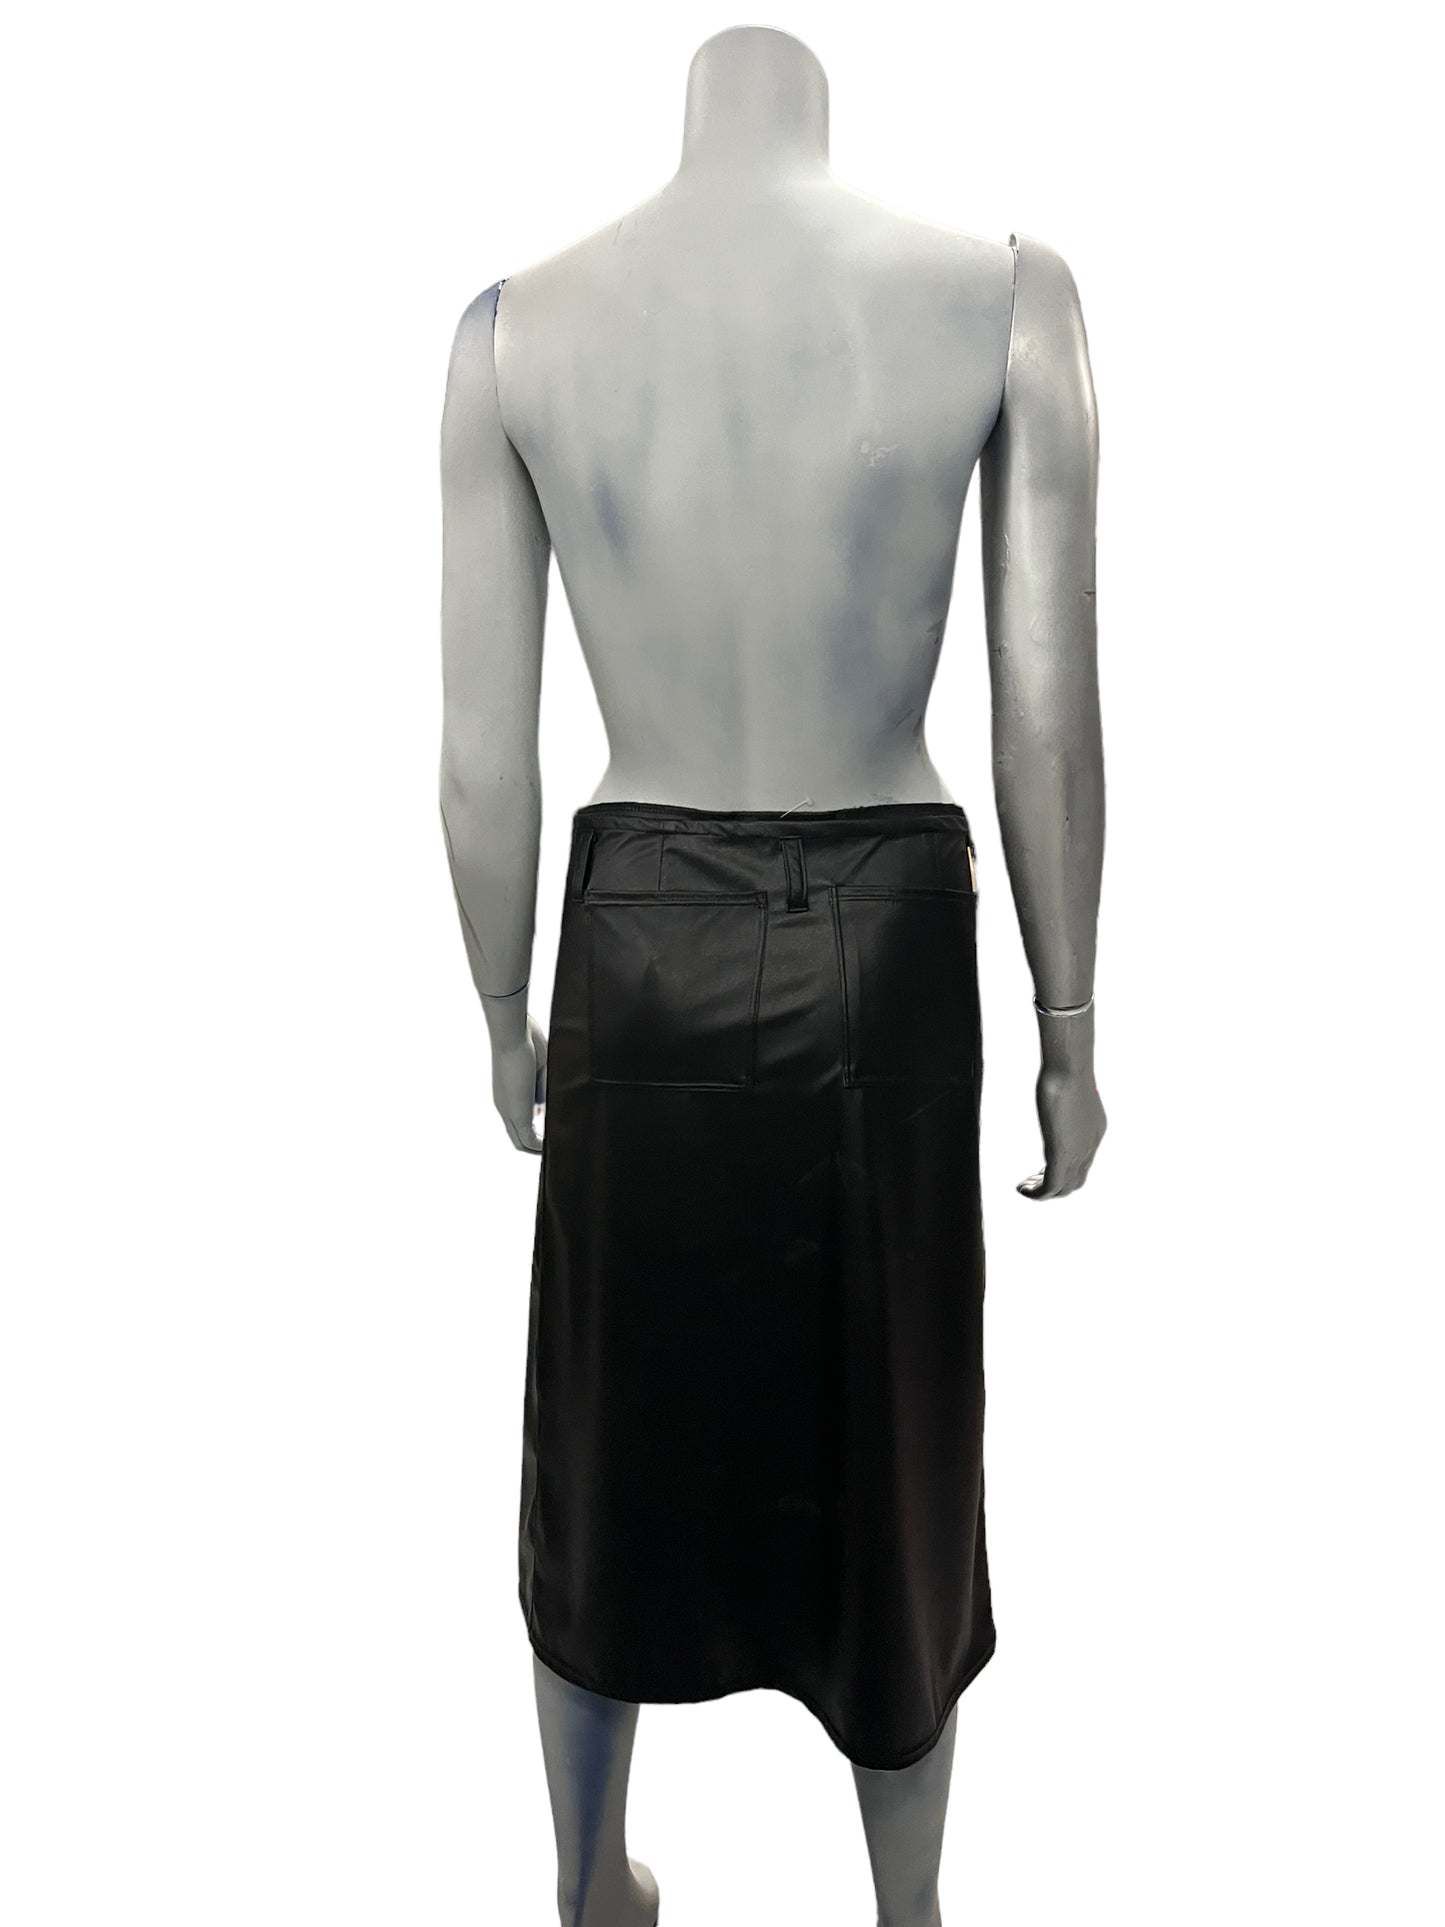 Peter Domenie - LL138 - Provocative Black Skirt - with Belt and Zipper - Size S